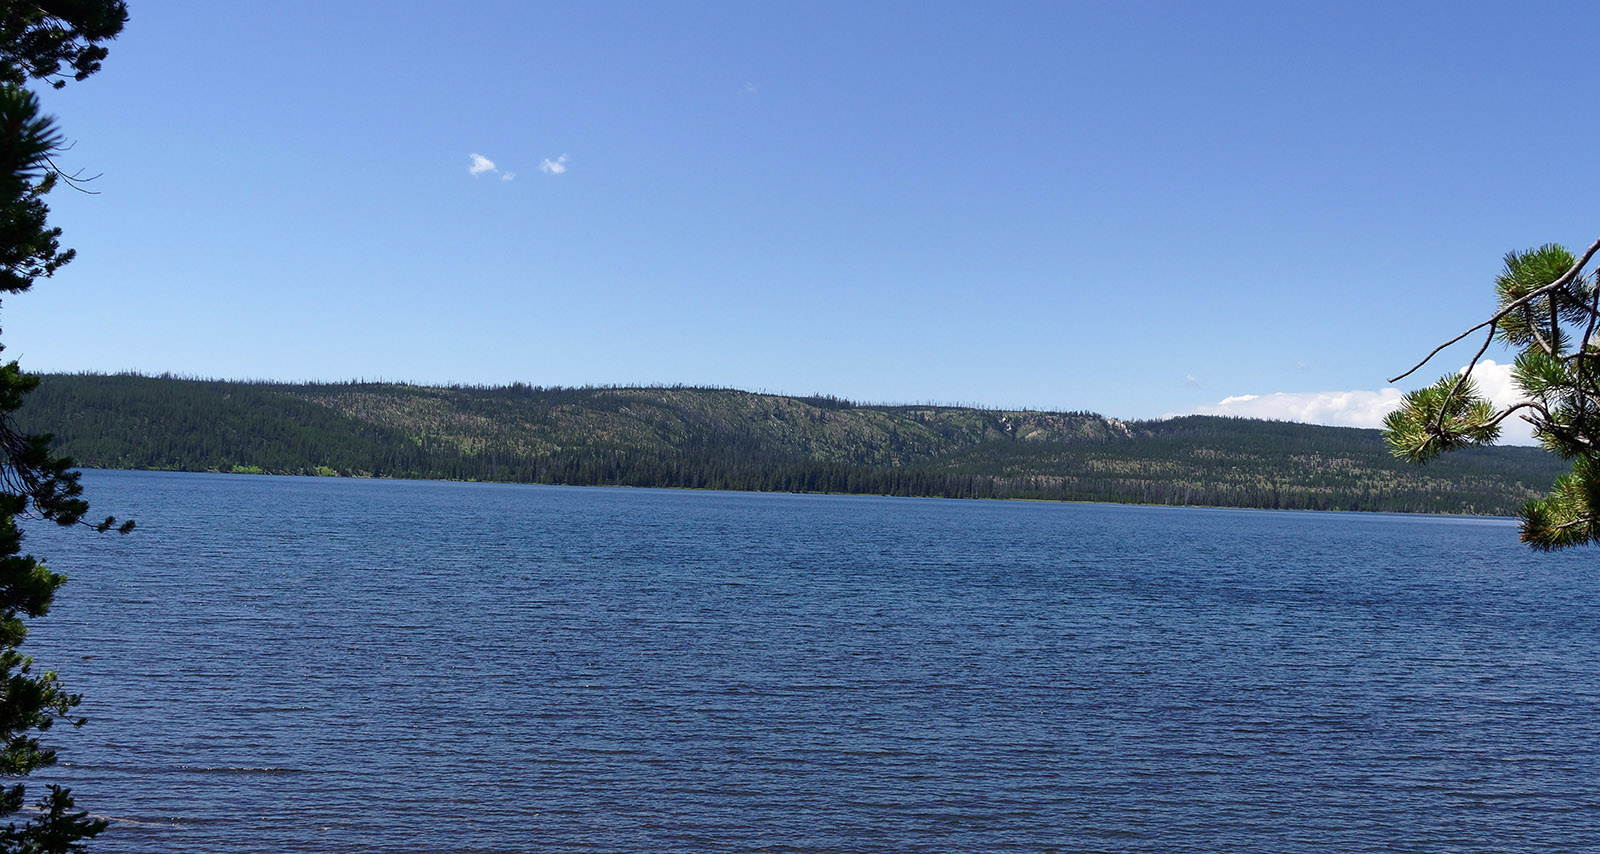 The southern rim of Lewis Lake marks the southern rim of the Yellowstone Caldera which was volcanically active 639,000 years ago.